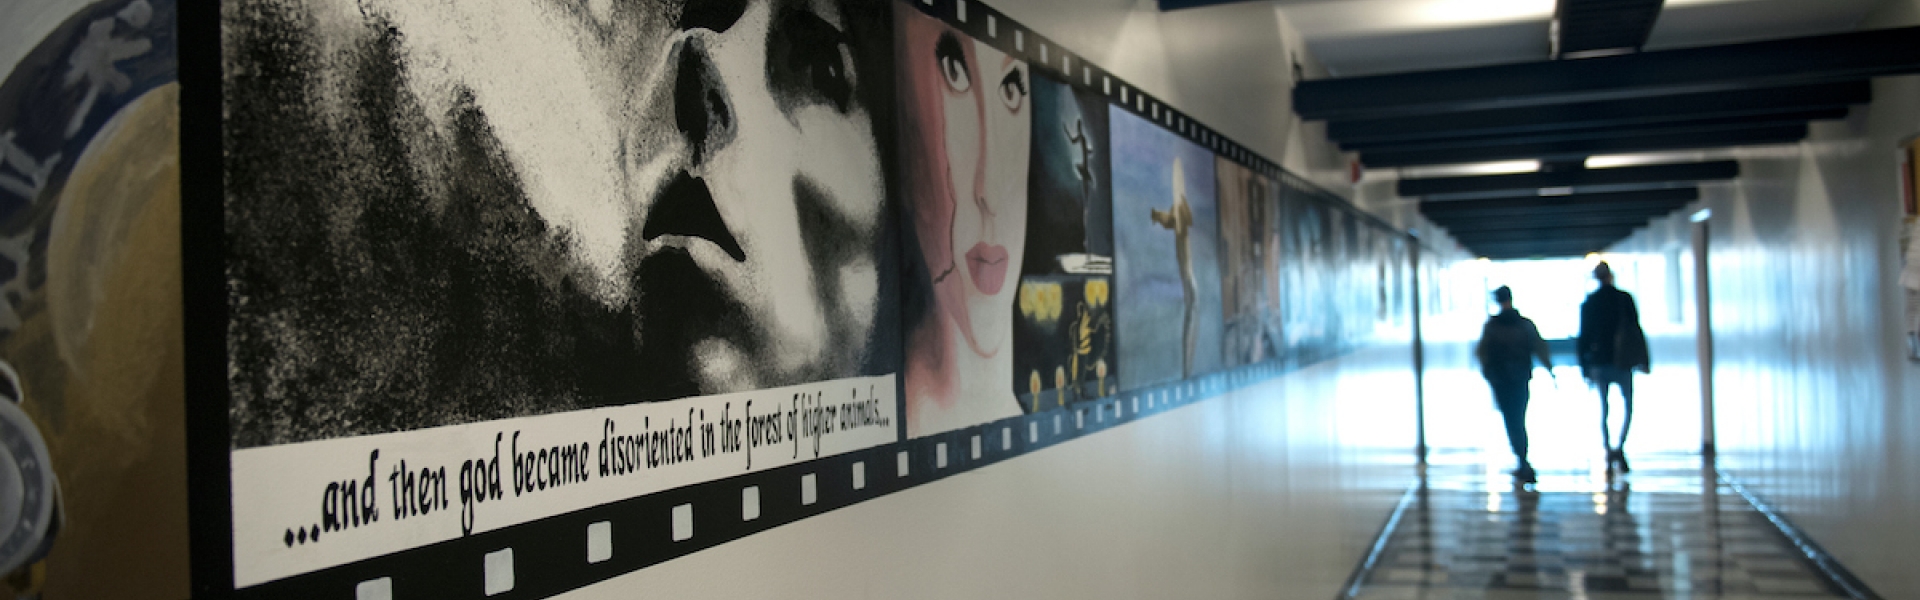 Film posters in hallway with silhouettes walking far away